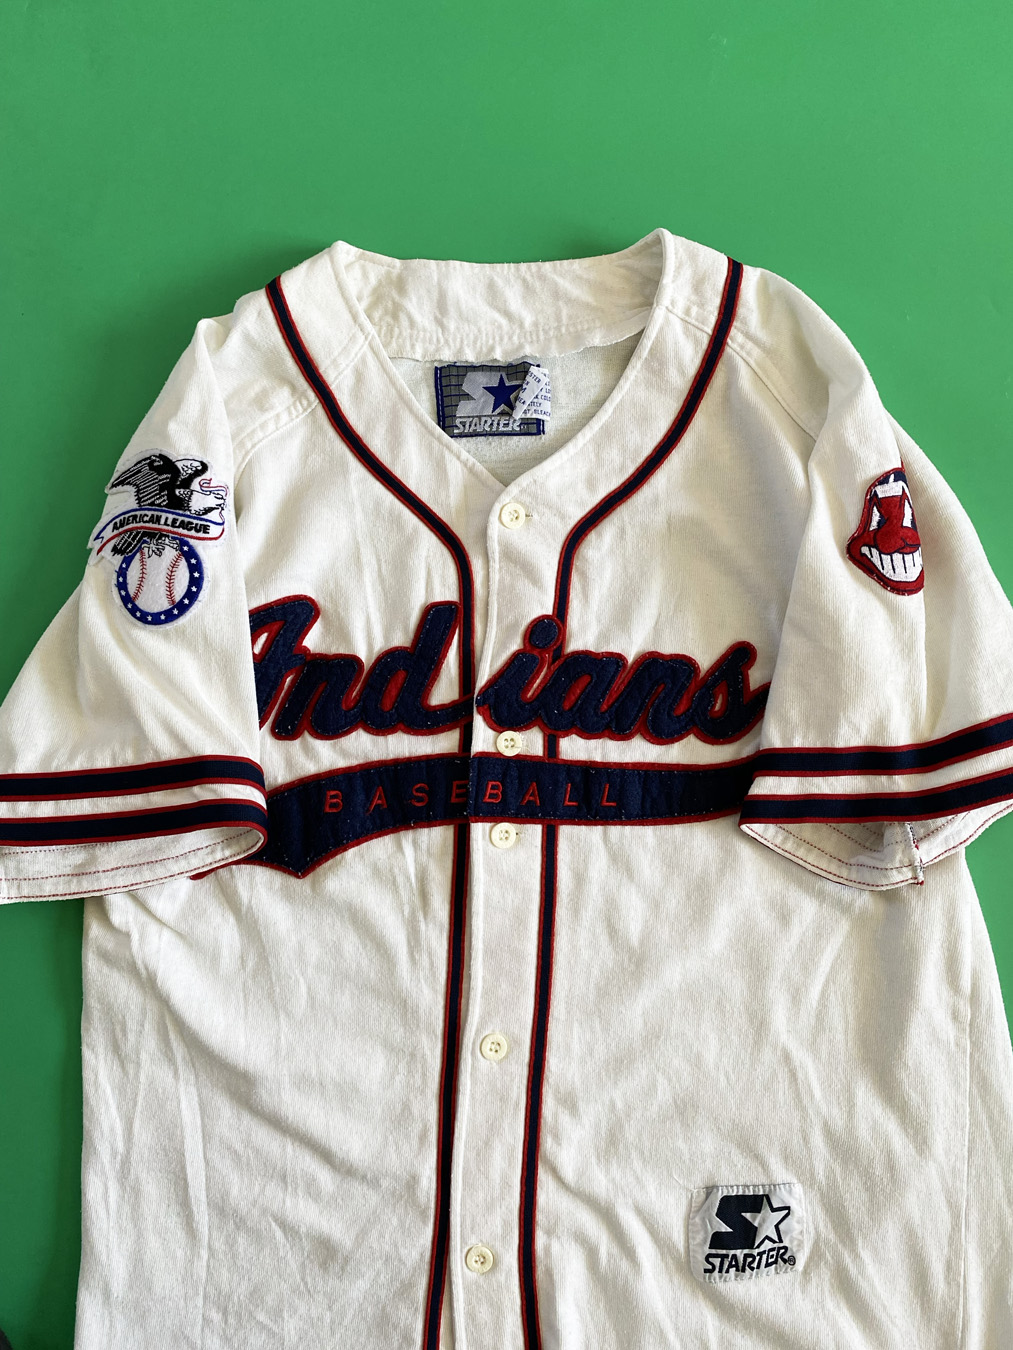 indians jersey patch